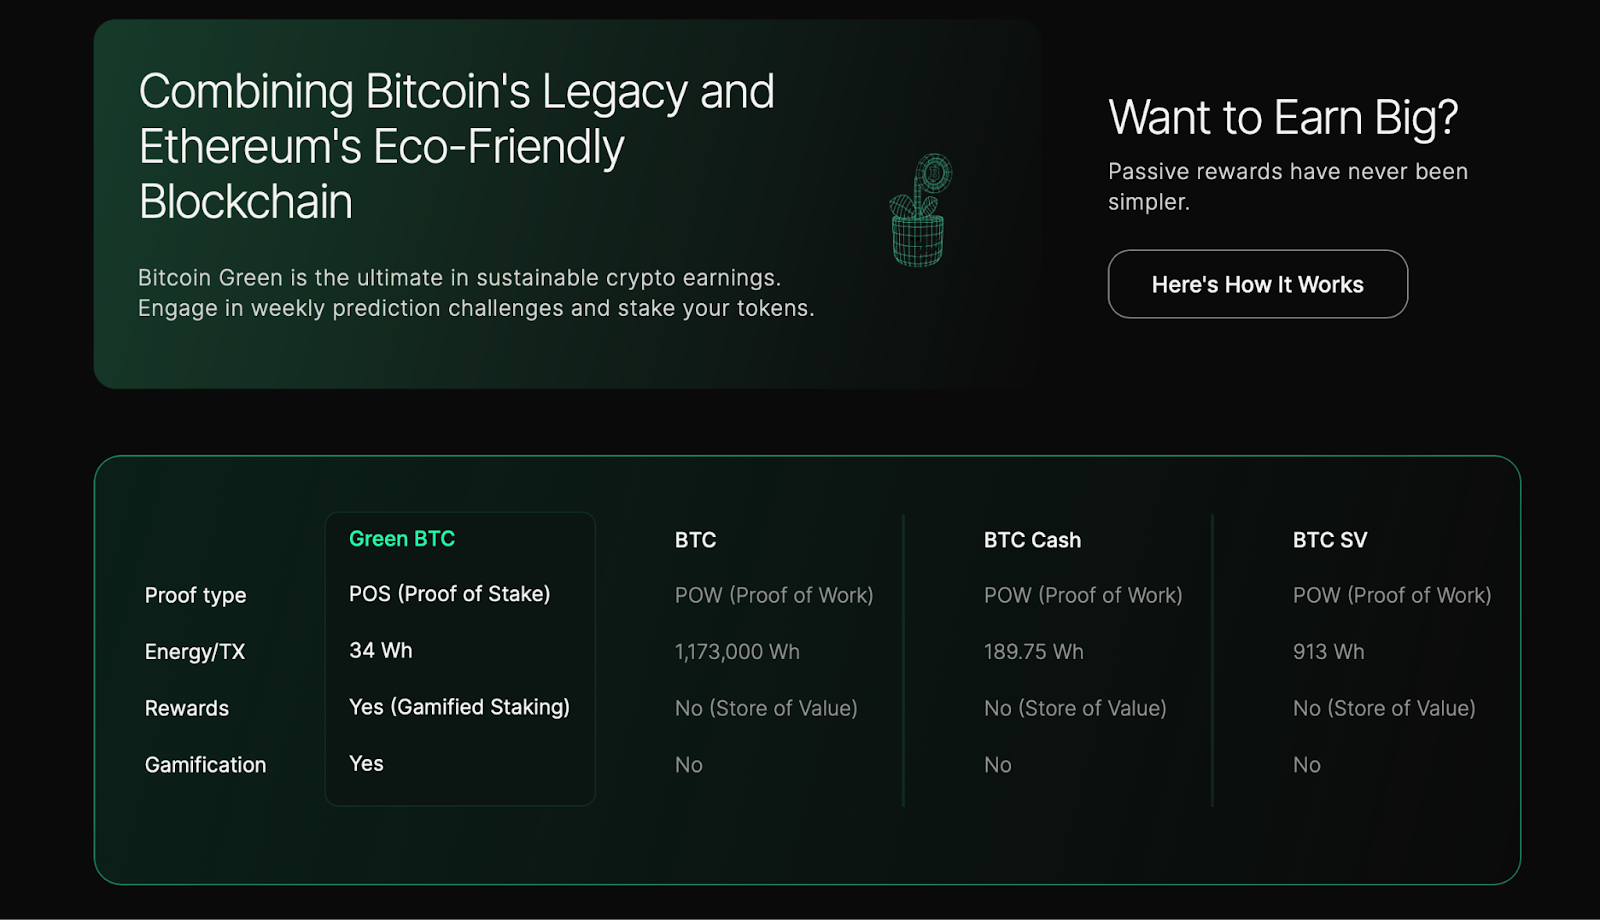 Green Bitcoin raises $1m in presale, allows holders to earn by predicting BTC prices - 2